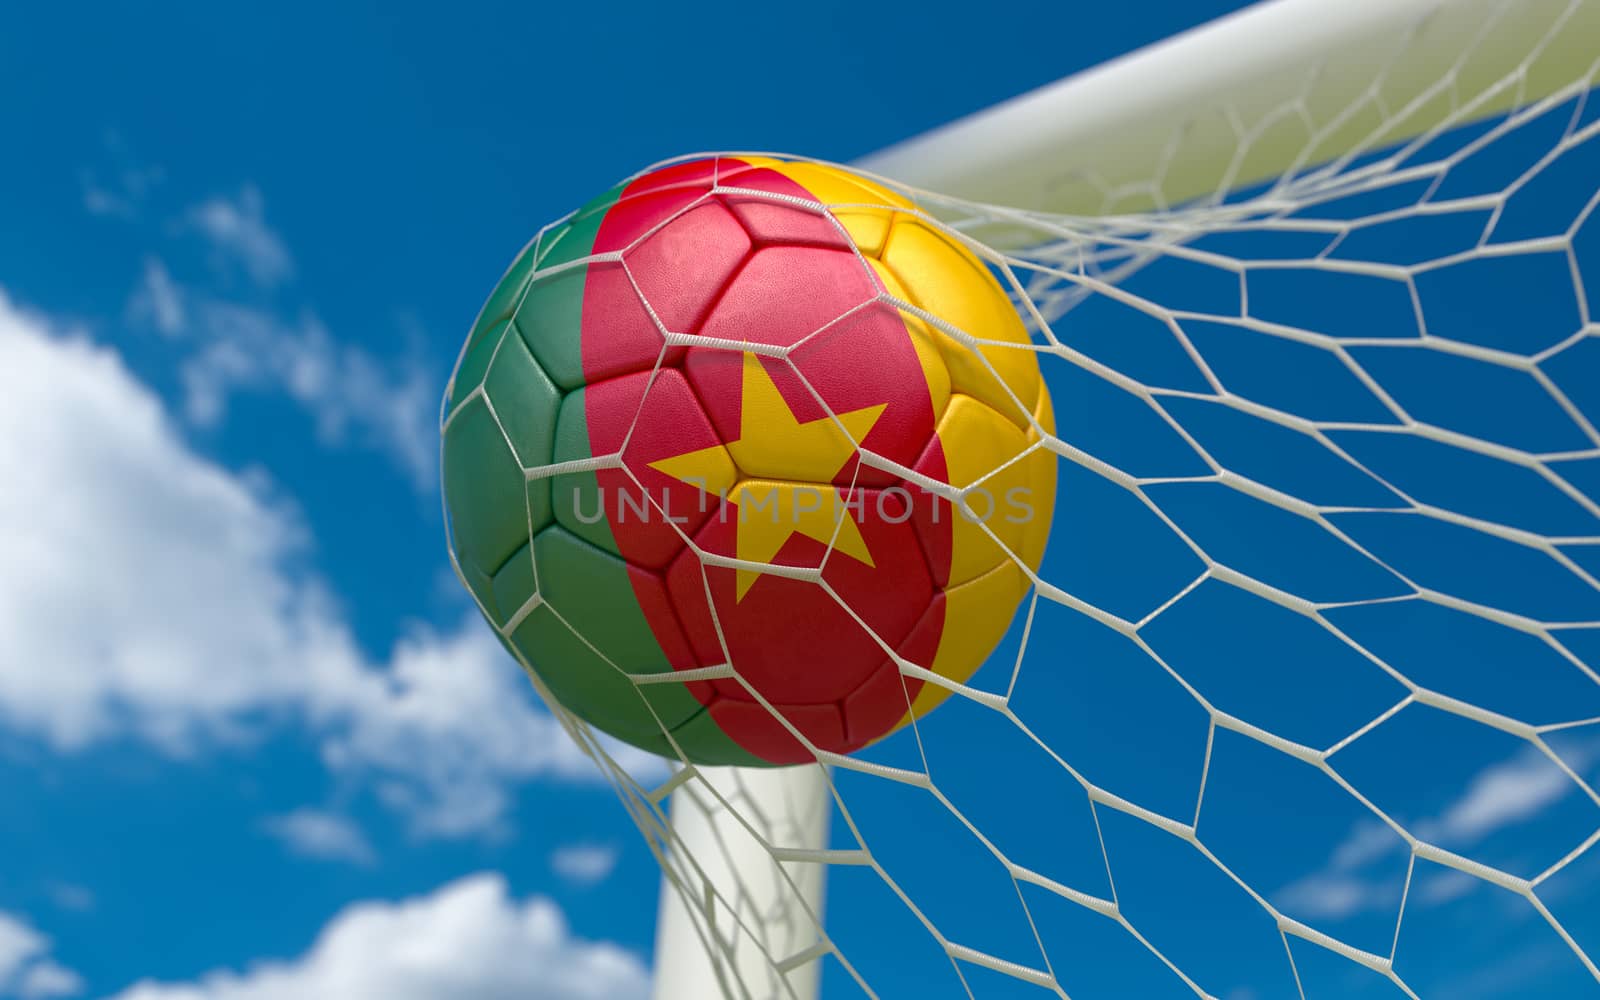 Cameroon flag and soccer ball in goal net by Barbraford